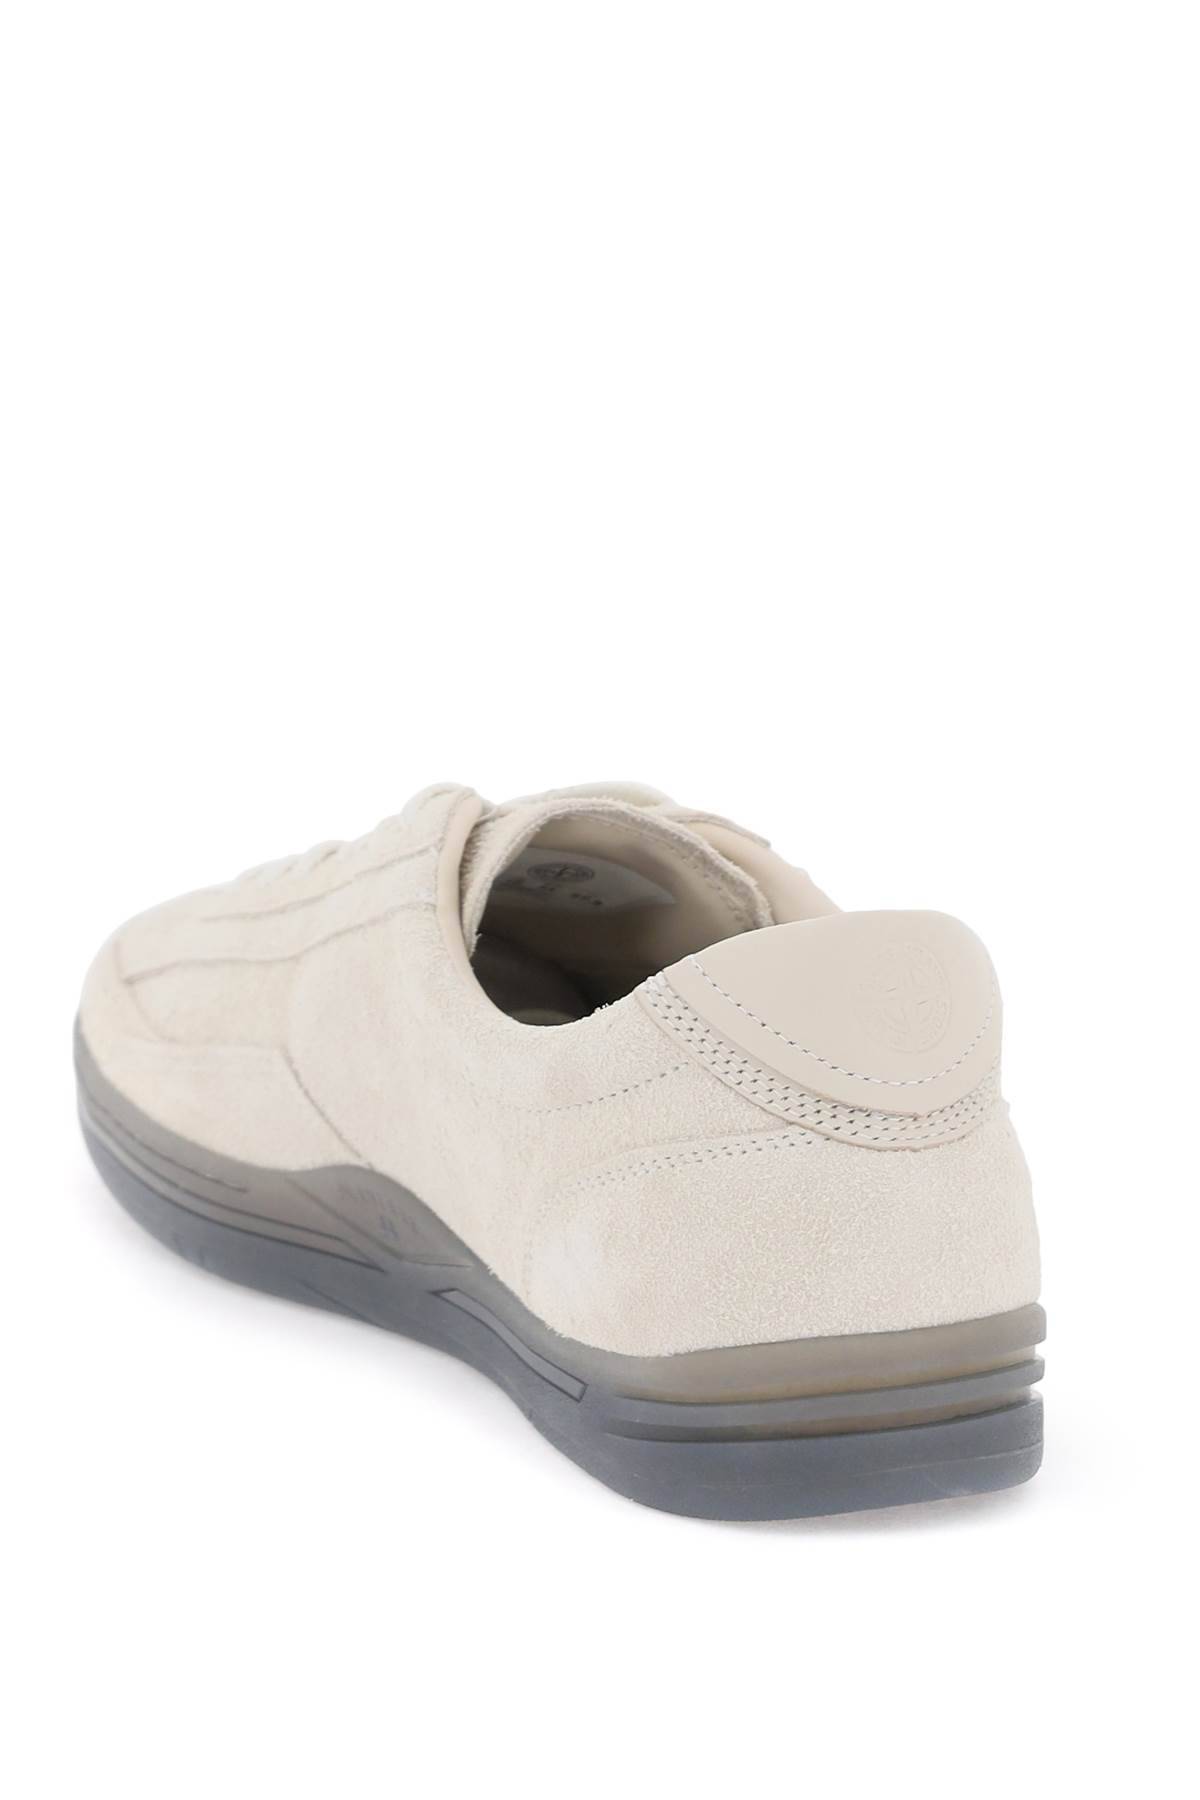 Shop Stone Island Suede Leather Rock Sneakers For In Neutro